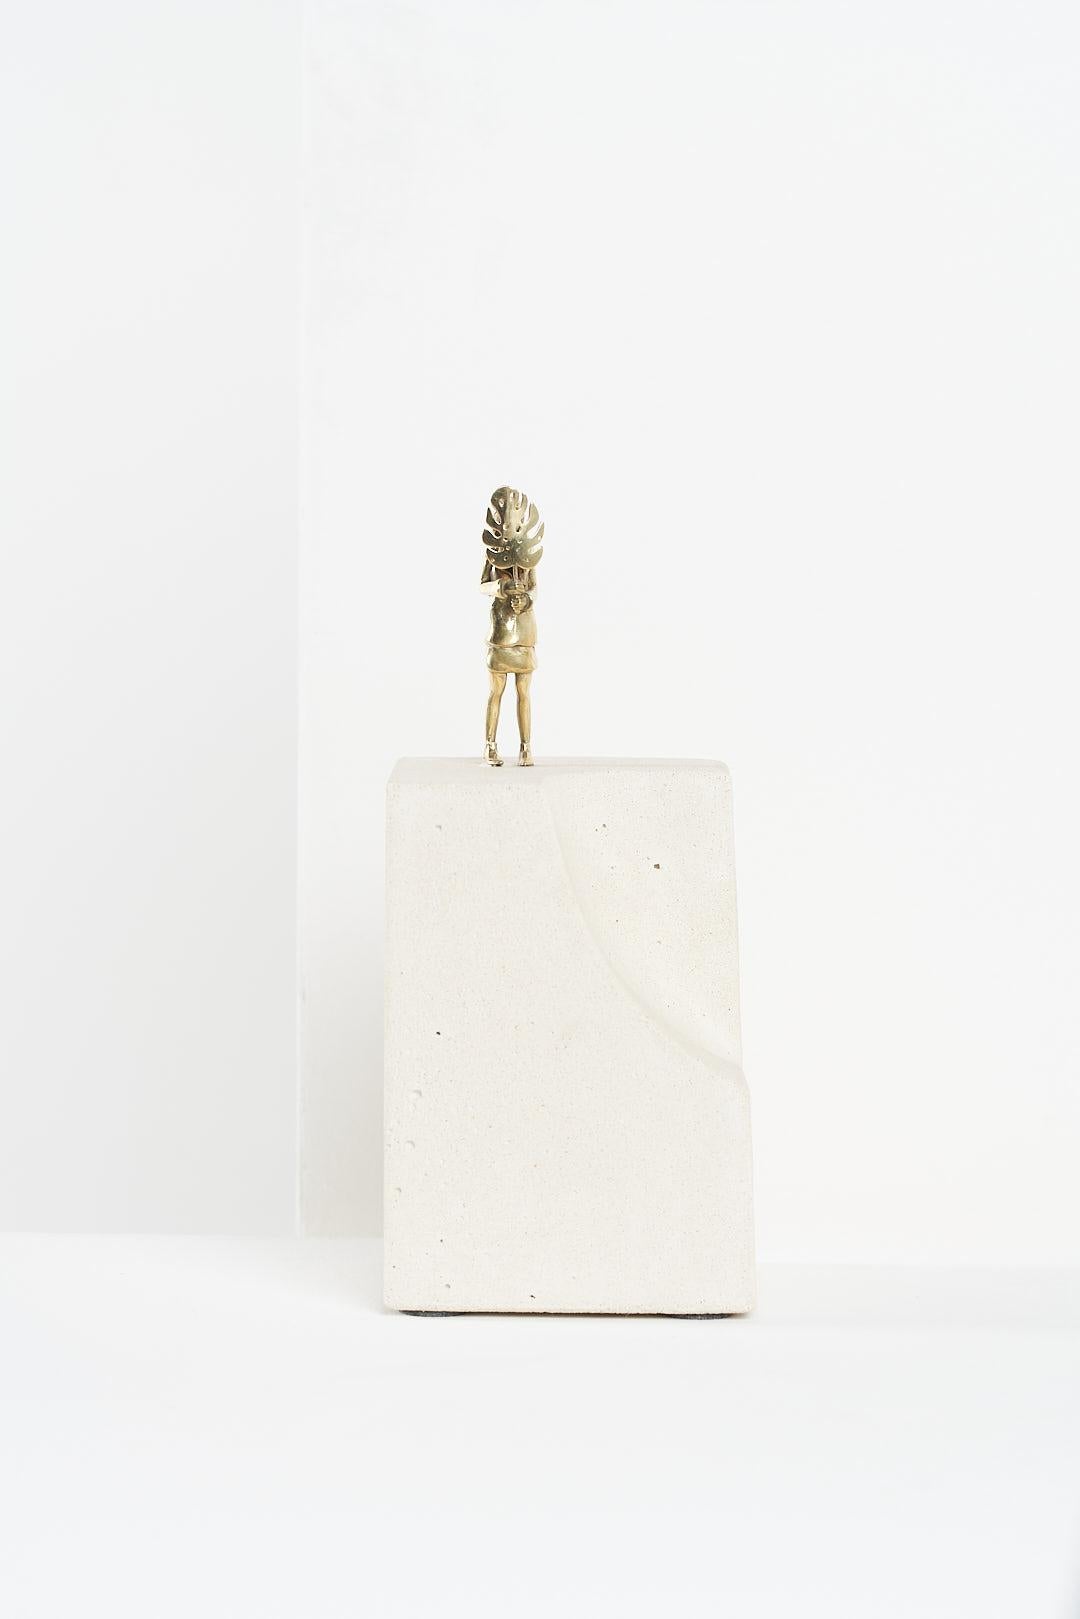 Sinestesia Series, Concrete and Brass Girl Sculpture N1 For Sale 7